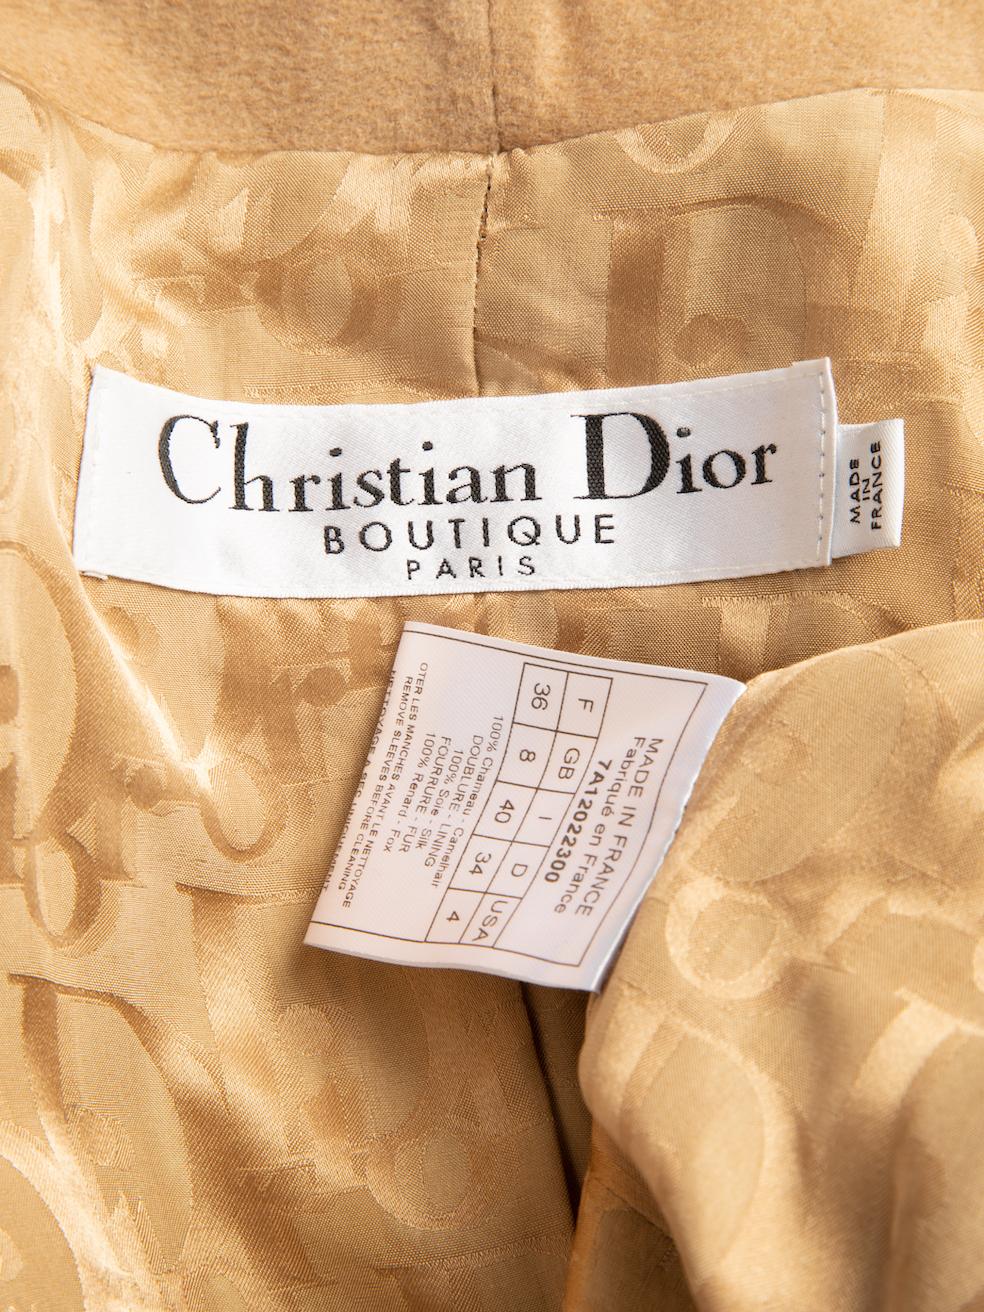 Pre-Loved Christian Dior Boutique Women's Vintage Camel Fitted Evening Jacket 1